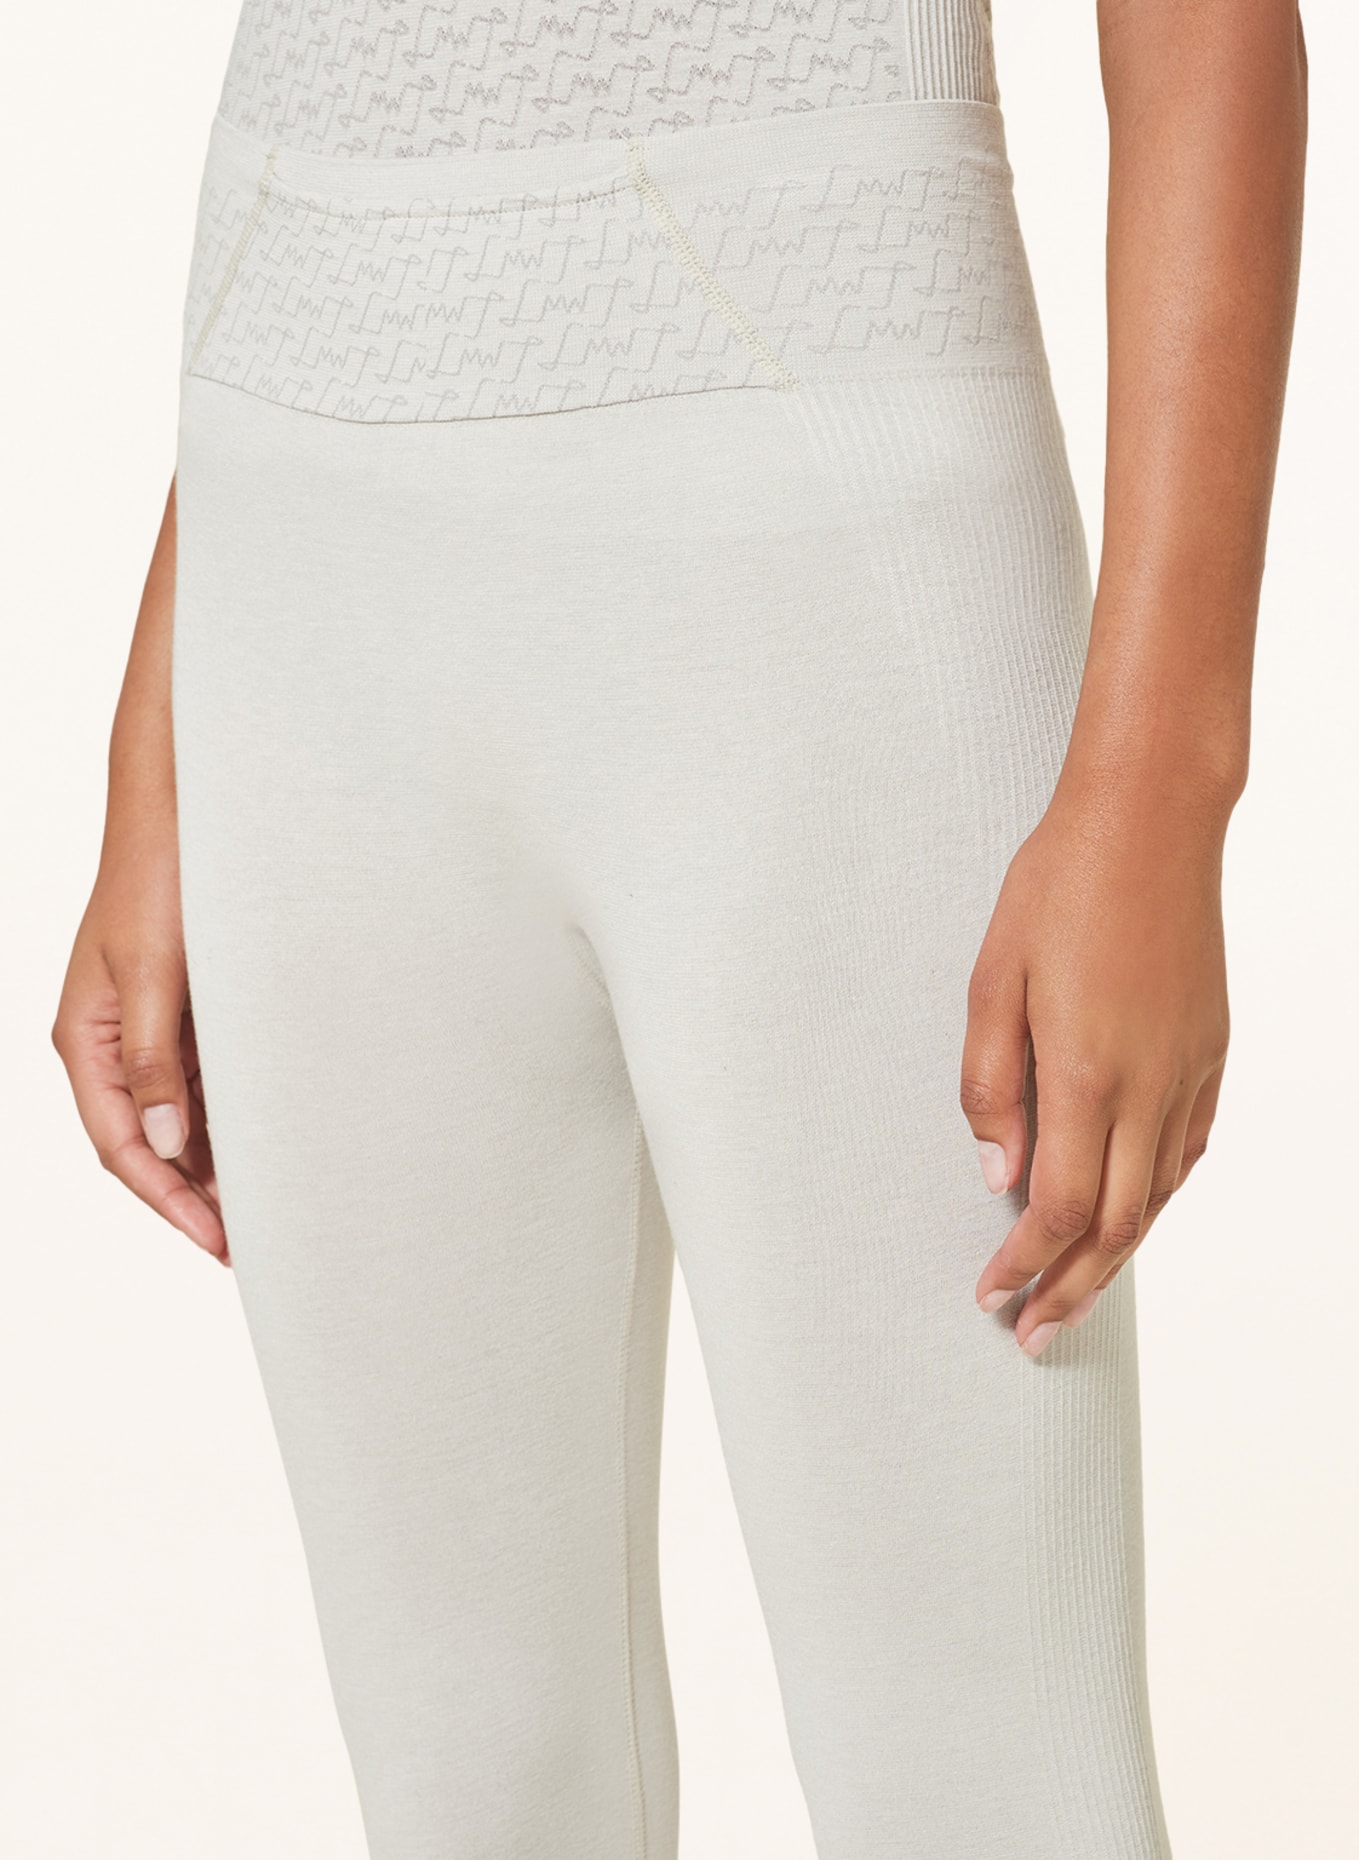 LaMunt Functional underwear trousers ALICE with cashmere, Color: CREAM (Image 5)